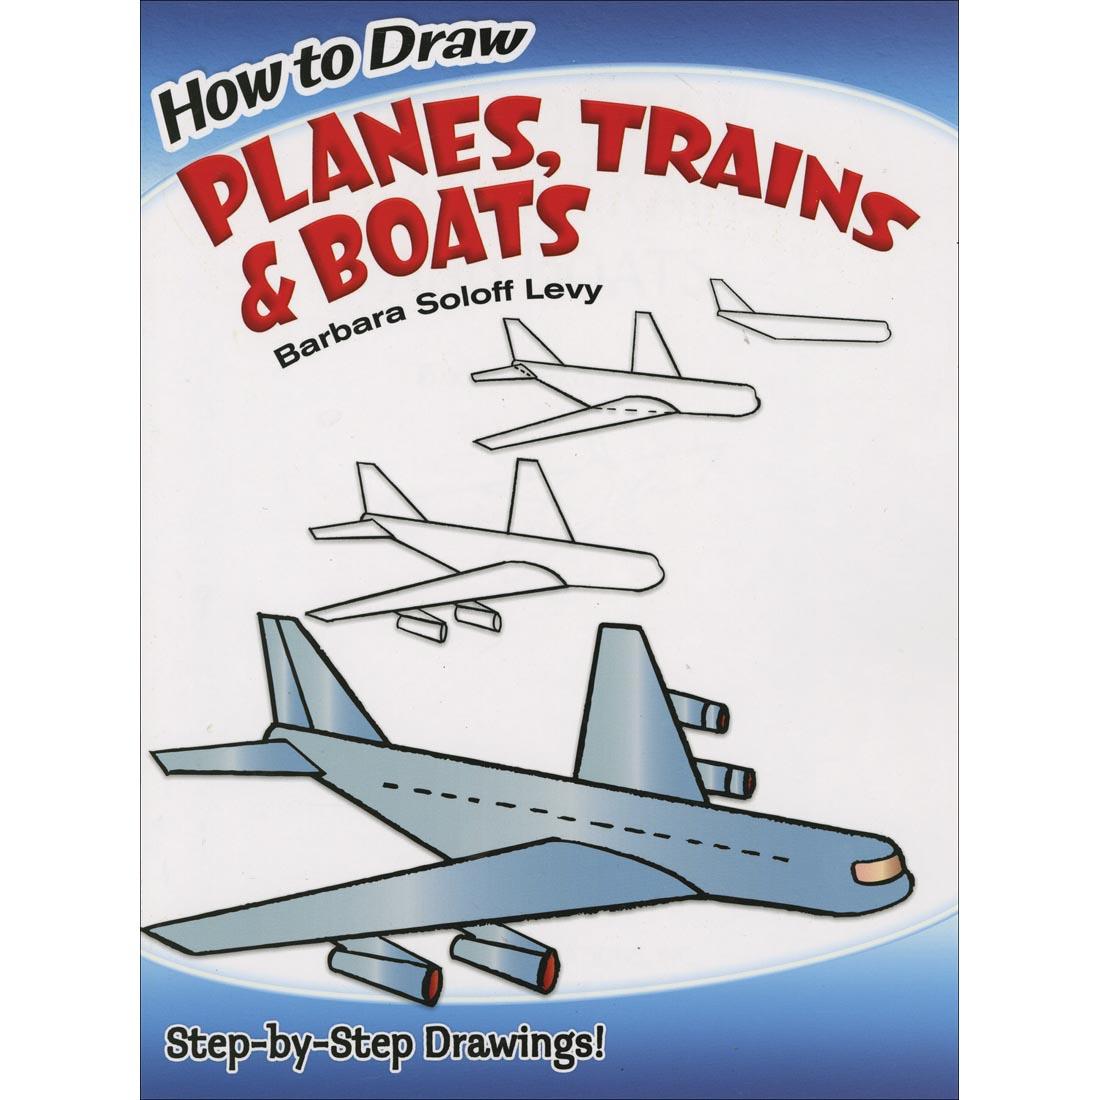 How To Draw Planes, Trains & Boats by Dover